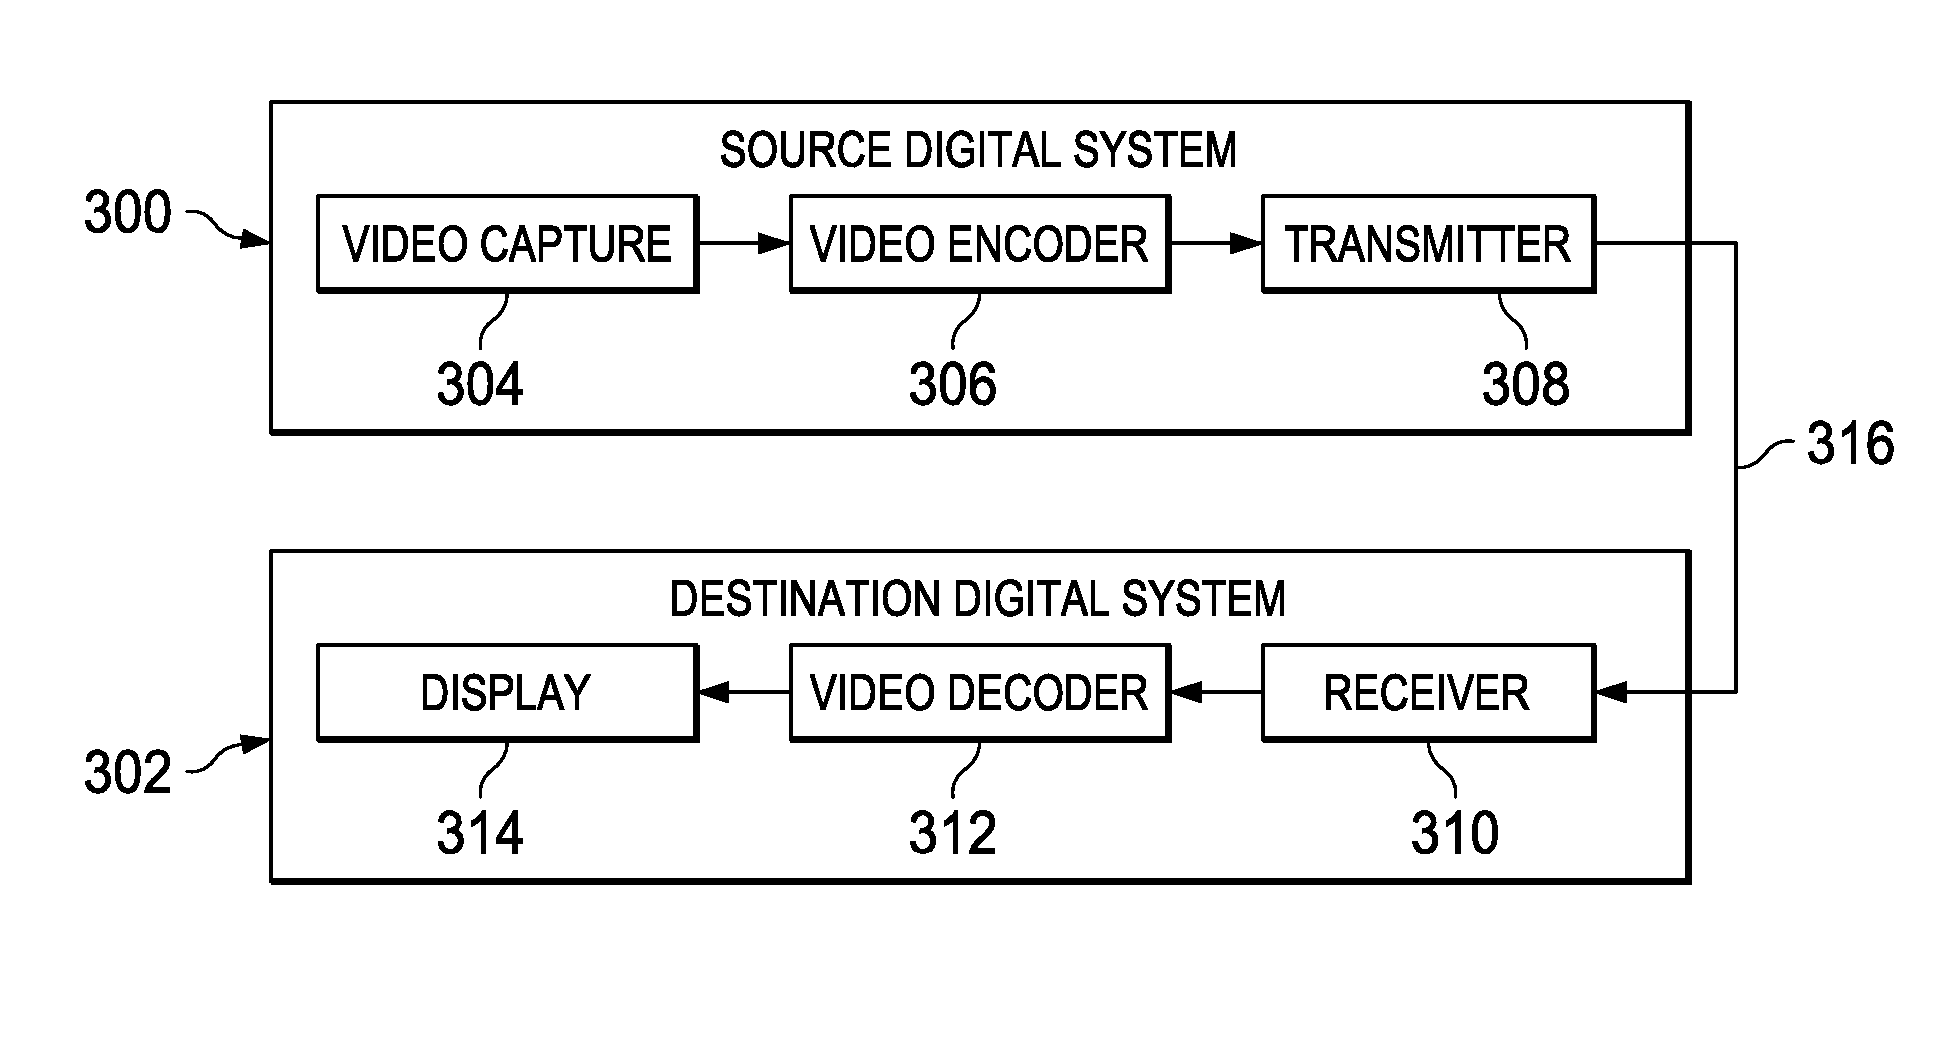 Signaling Signed Band Offset Values for Sample Adaptive Offset (SAO) Filtering in Video Coding